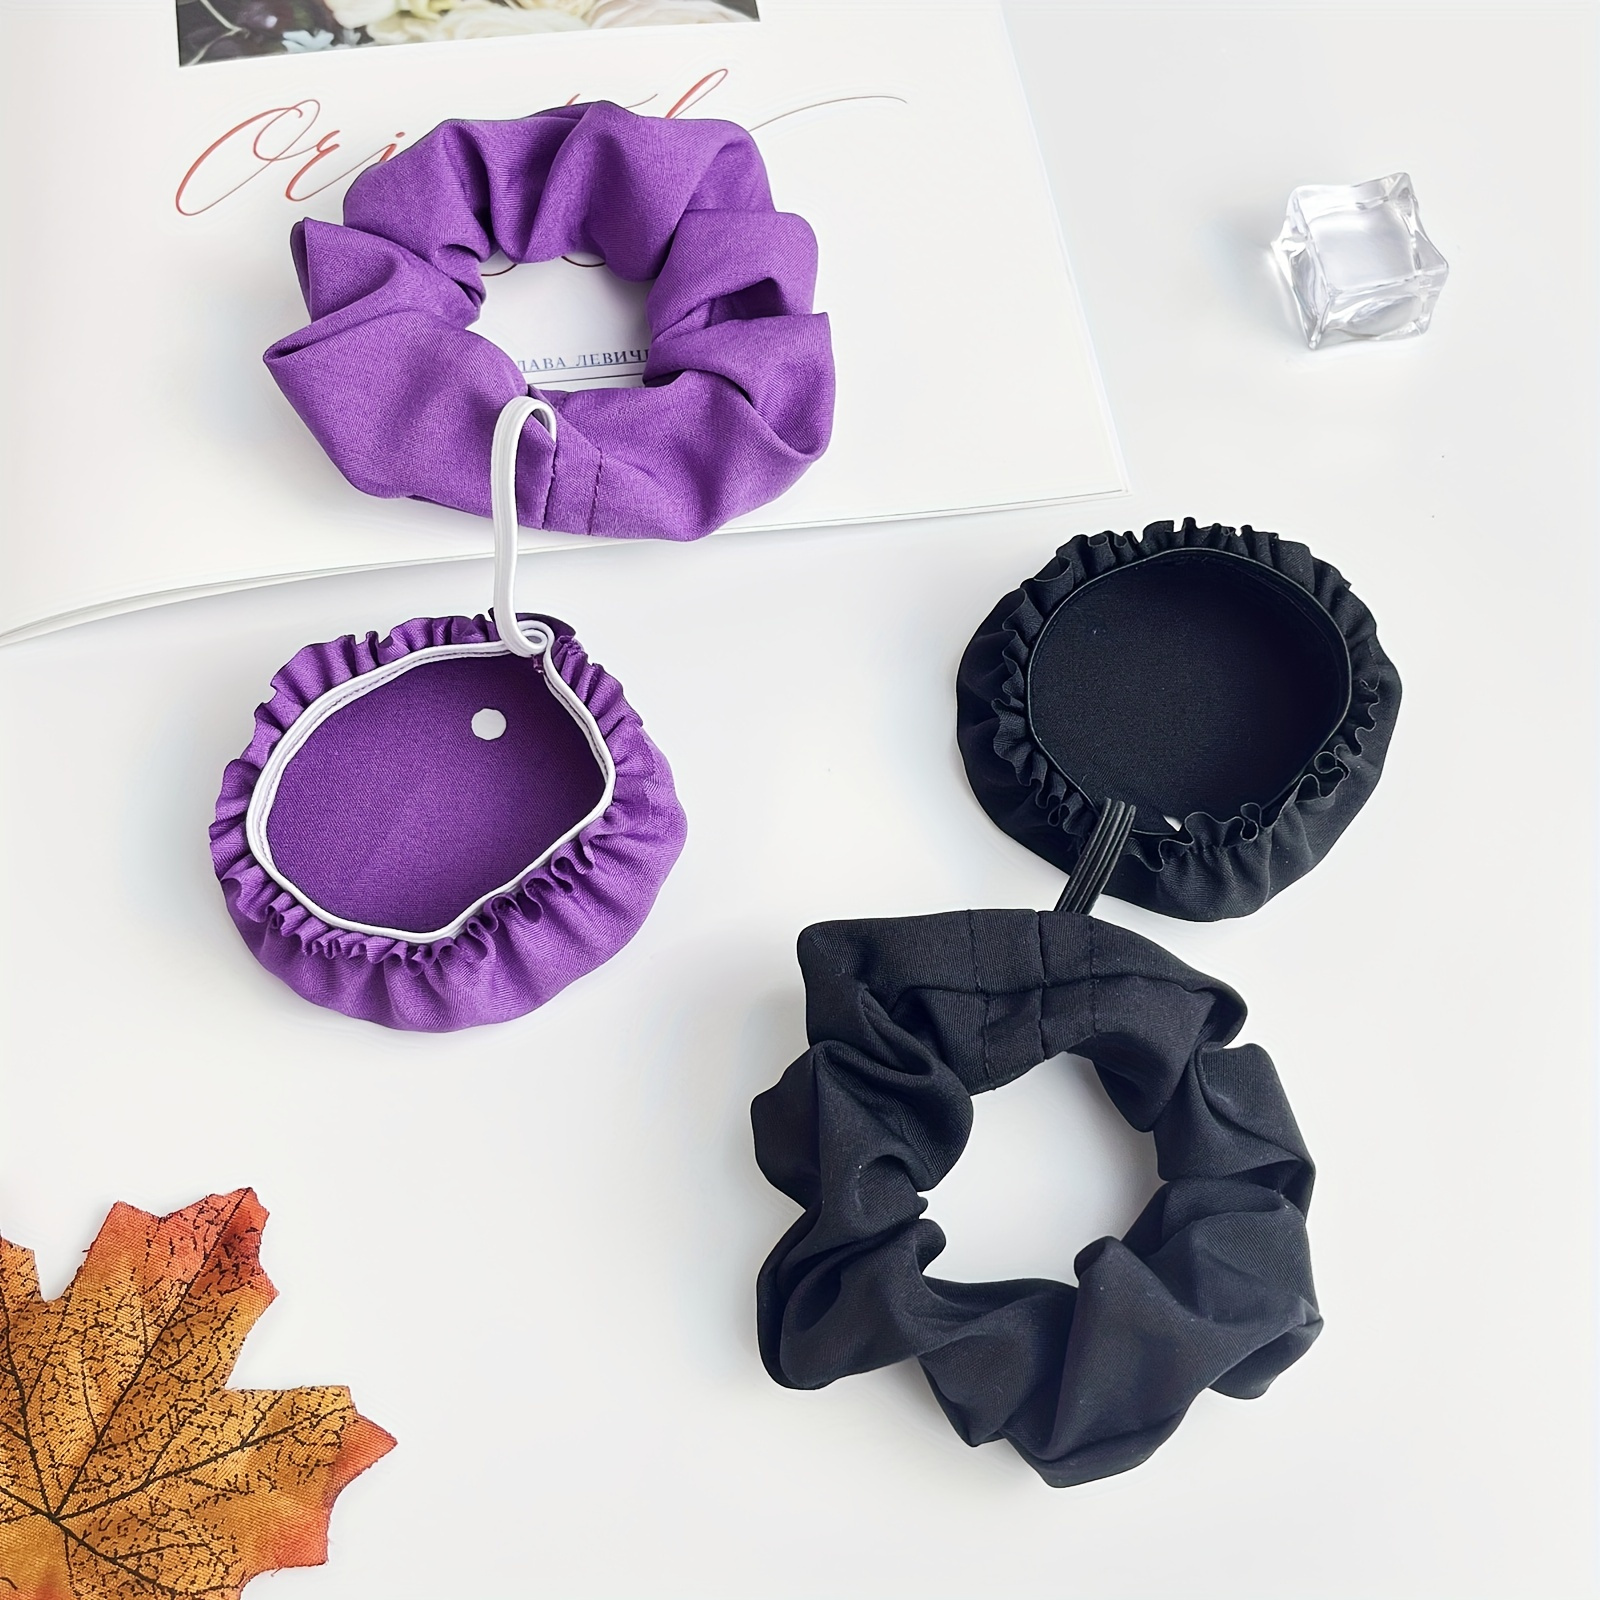 

Reusable Drink Cover Scrunchies For Parties And Clubs - Fashionable And Washable